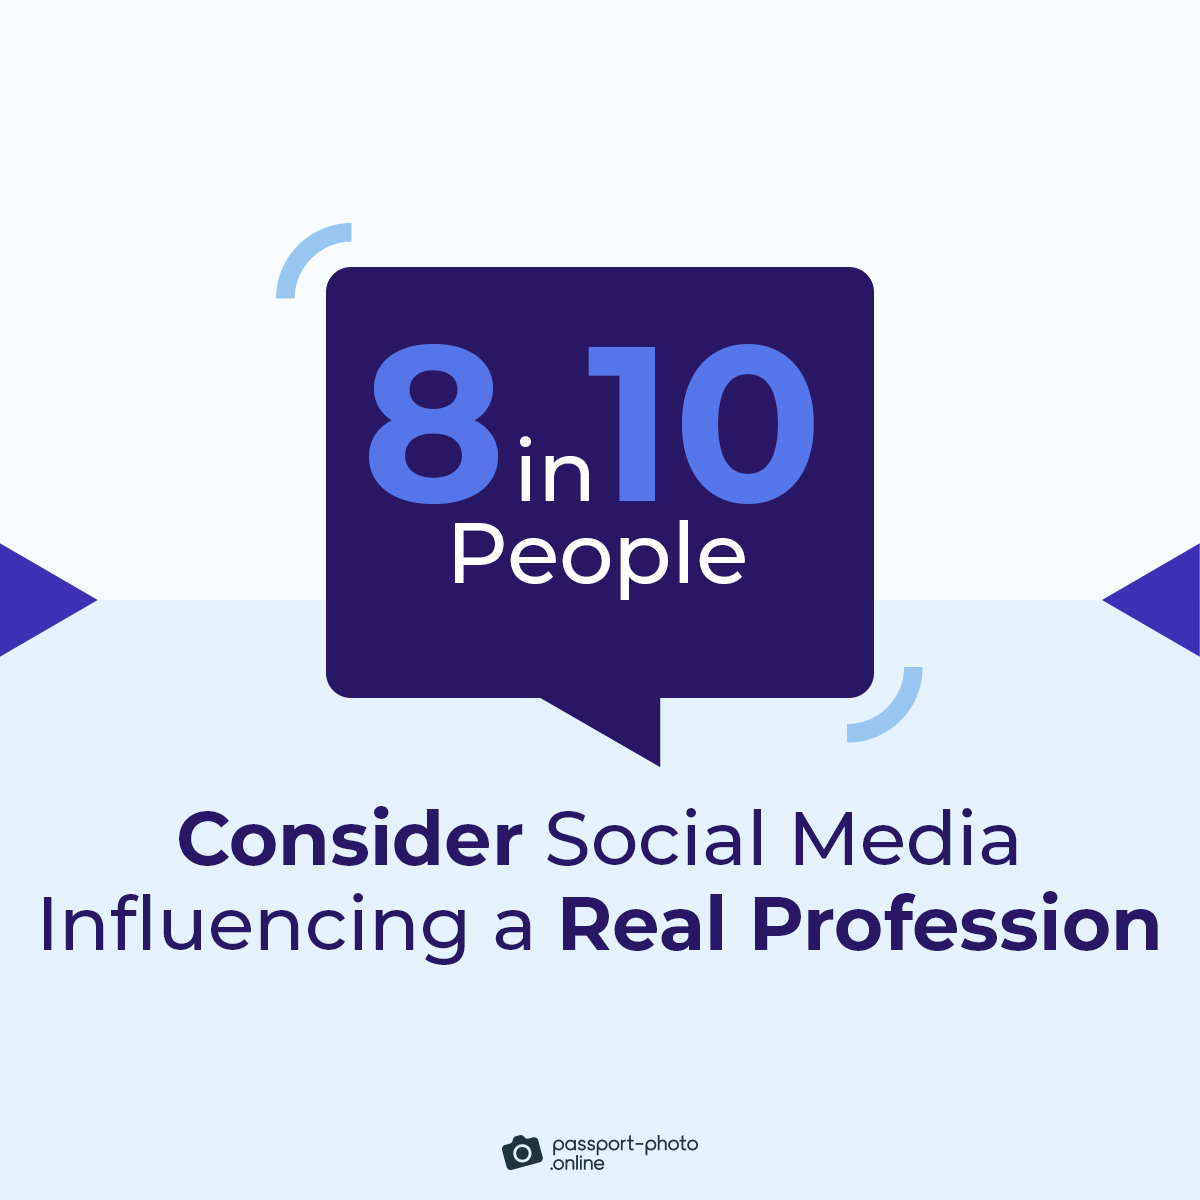 nearly 8 in 10 people consider social media influencing a real profession